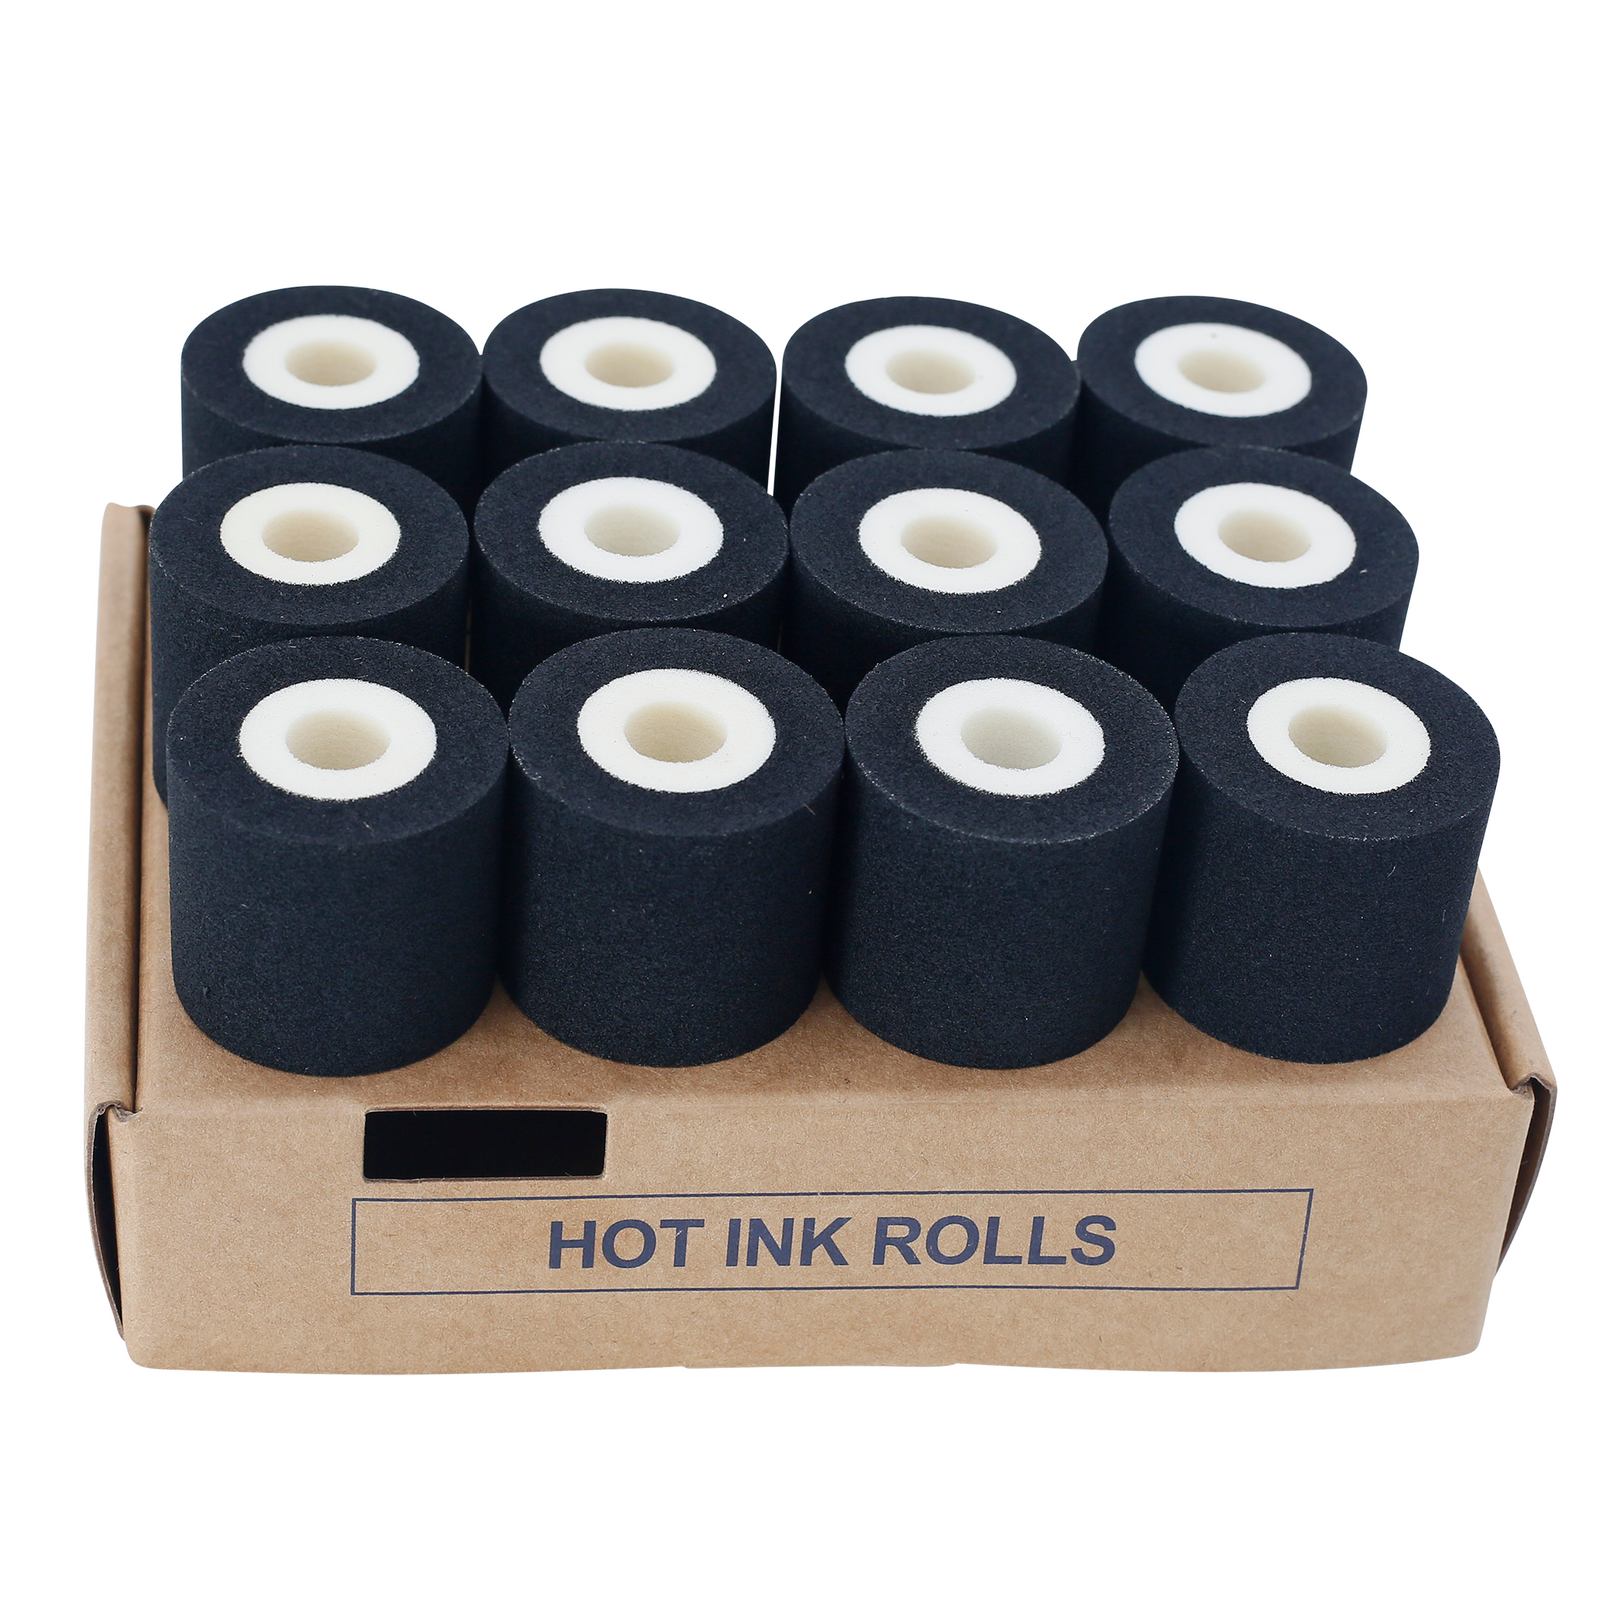 Pack of12 rolls of 32mm black hot ink stamp rolls positioned on top of their original card box